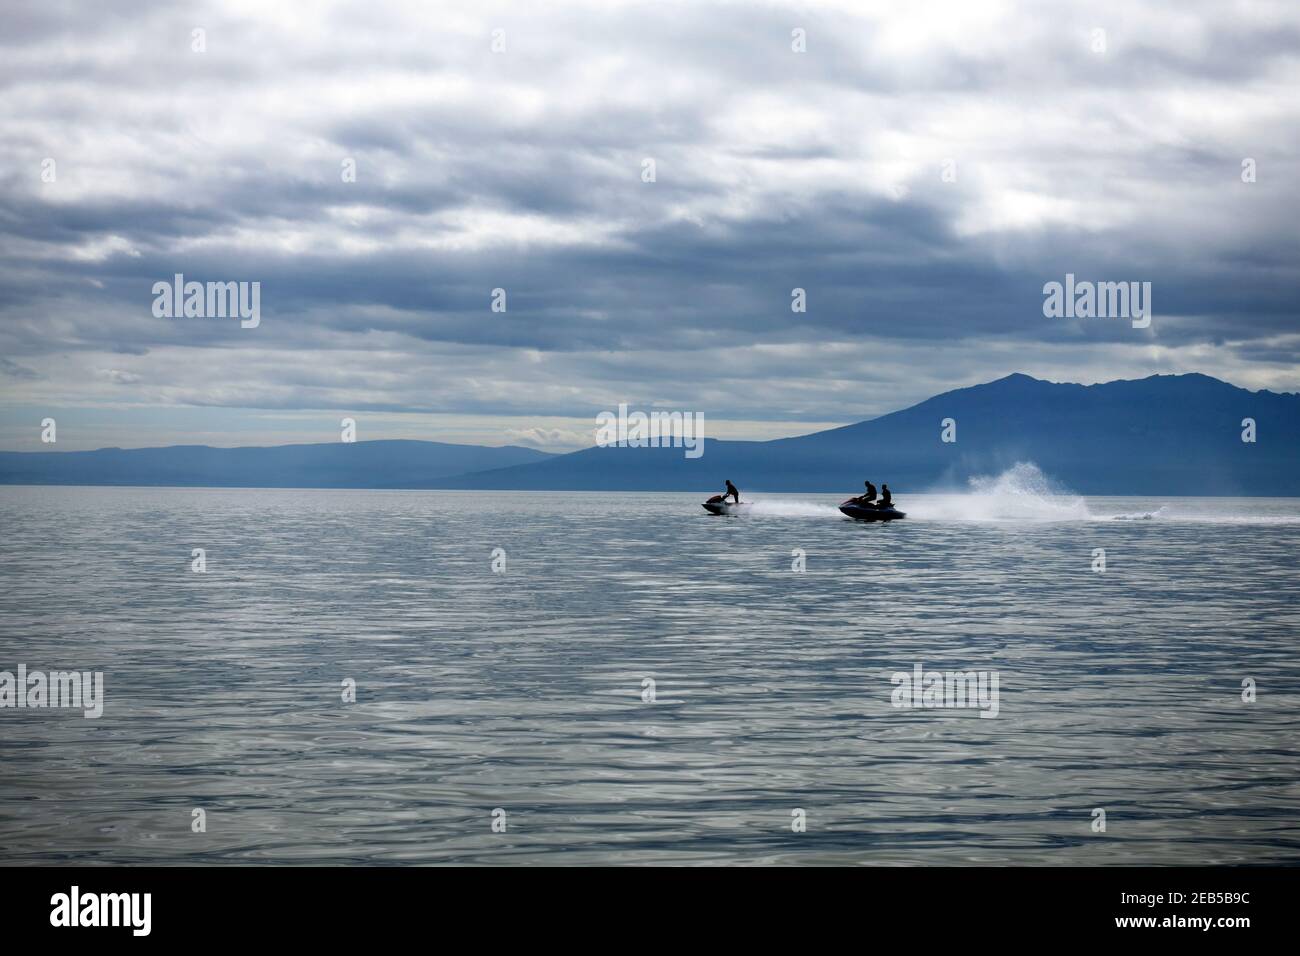 Jet ski riders on the Firth of Clyde with the hills of the Isle of Arran in the background, Scotland Stock Photo